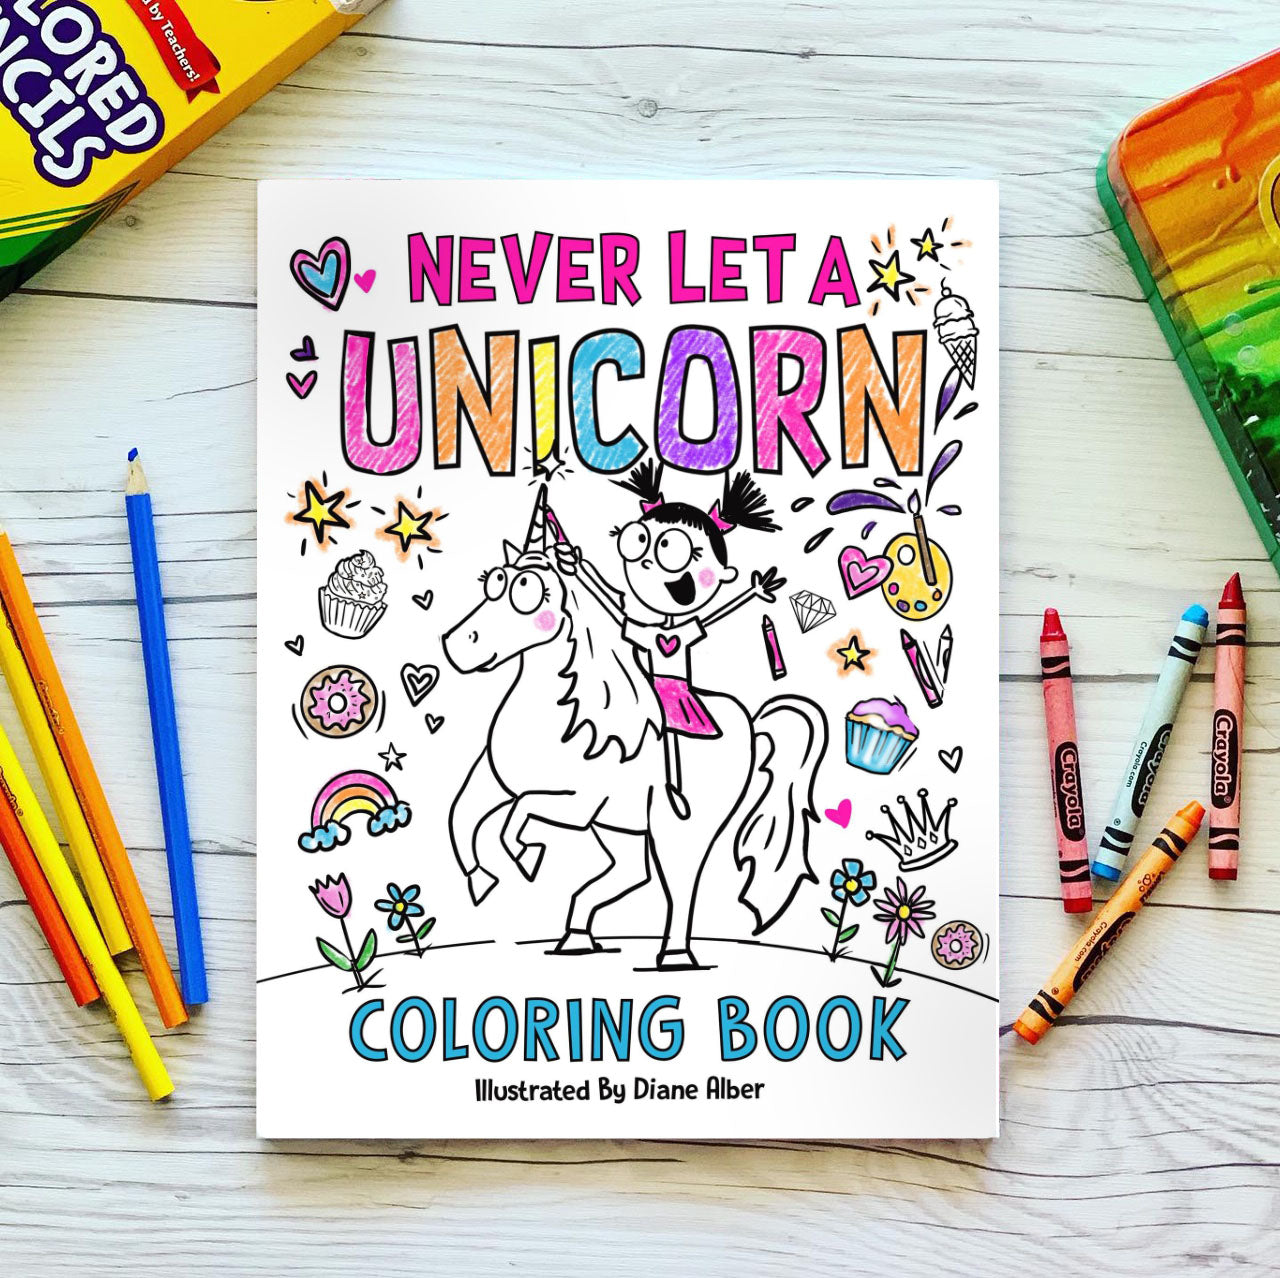 The 10+ Best Coloring Books for Adults 2022 - Art Coloring Books